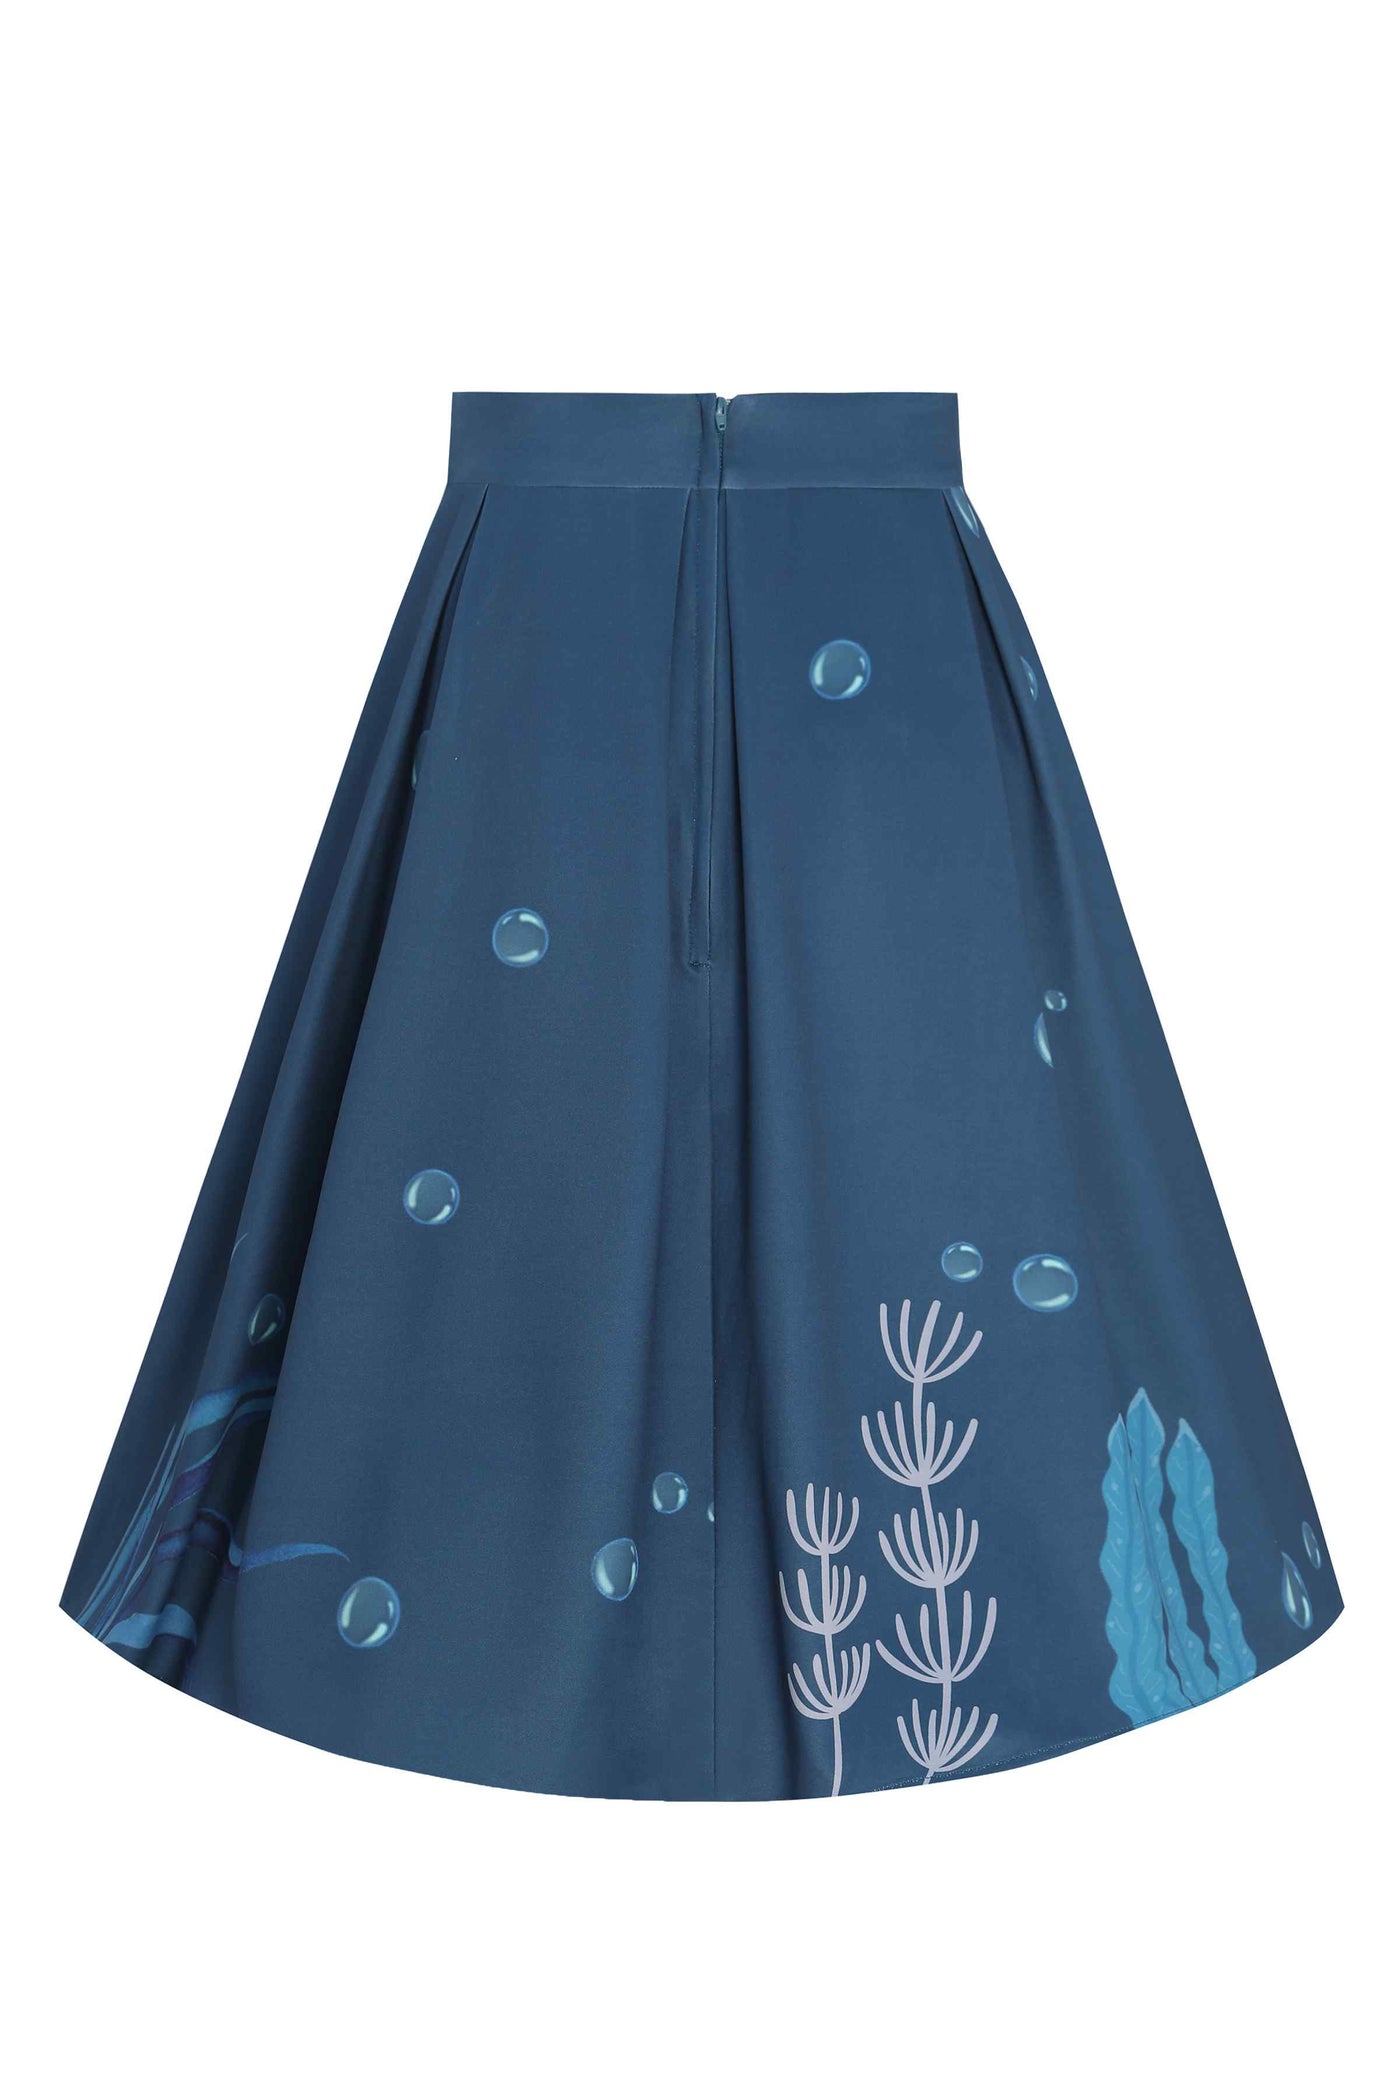 Back view of cute blue seahorse box pleated vintage inspired skirt